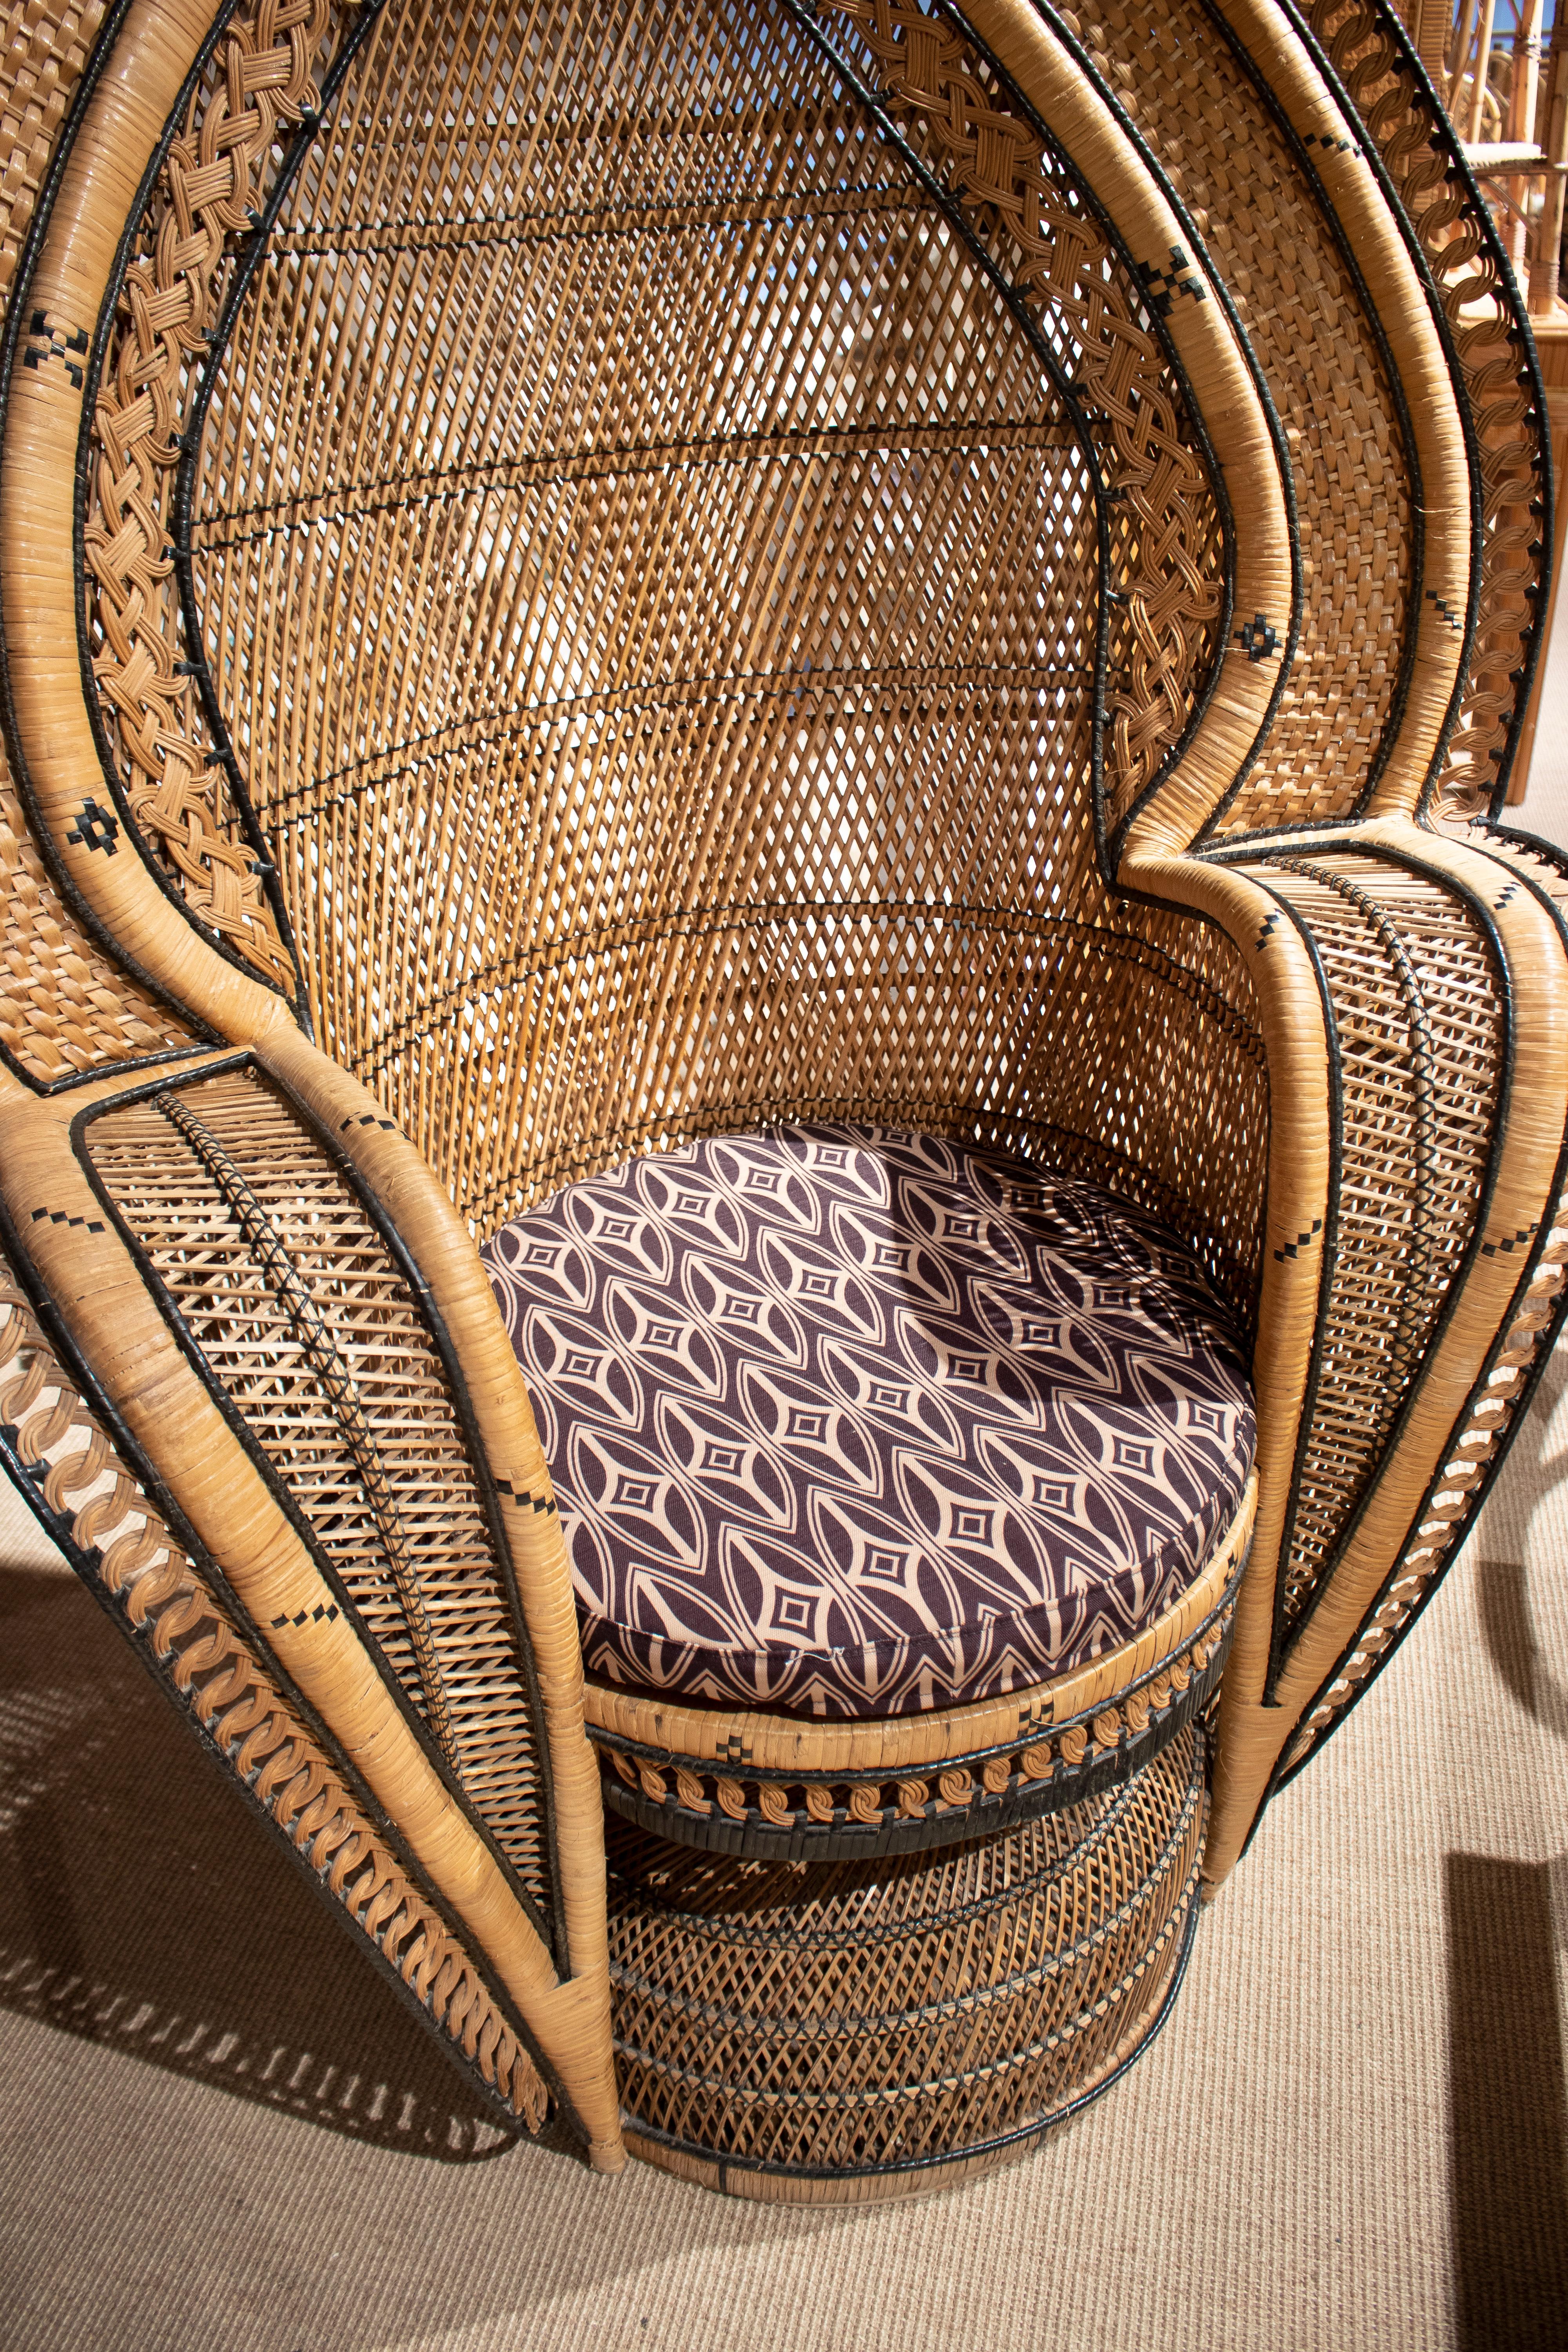 20th Century 1970s Spanish Woven 2-Tone Wicker “Emmanuelle” Peacock Chair For Sale